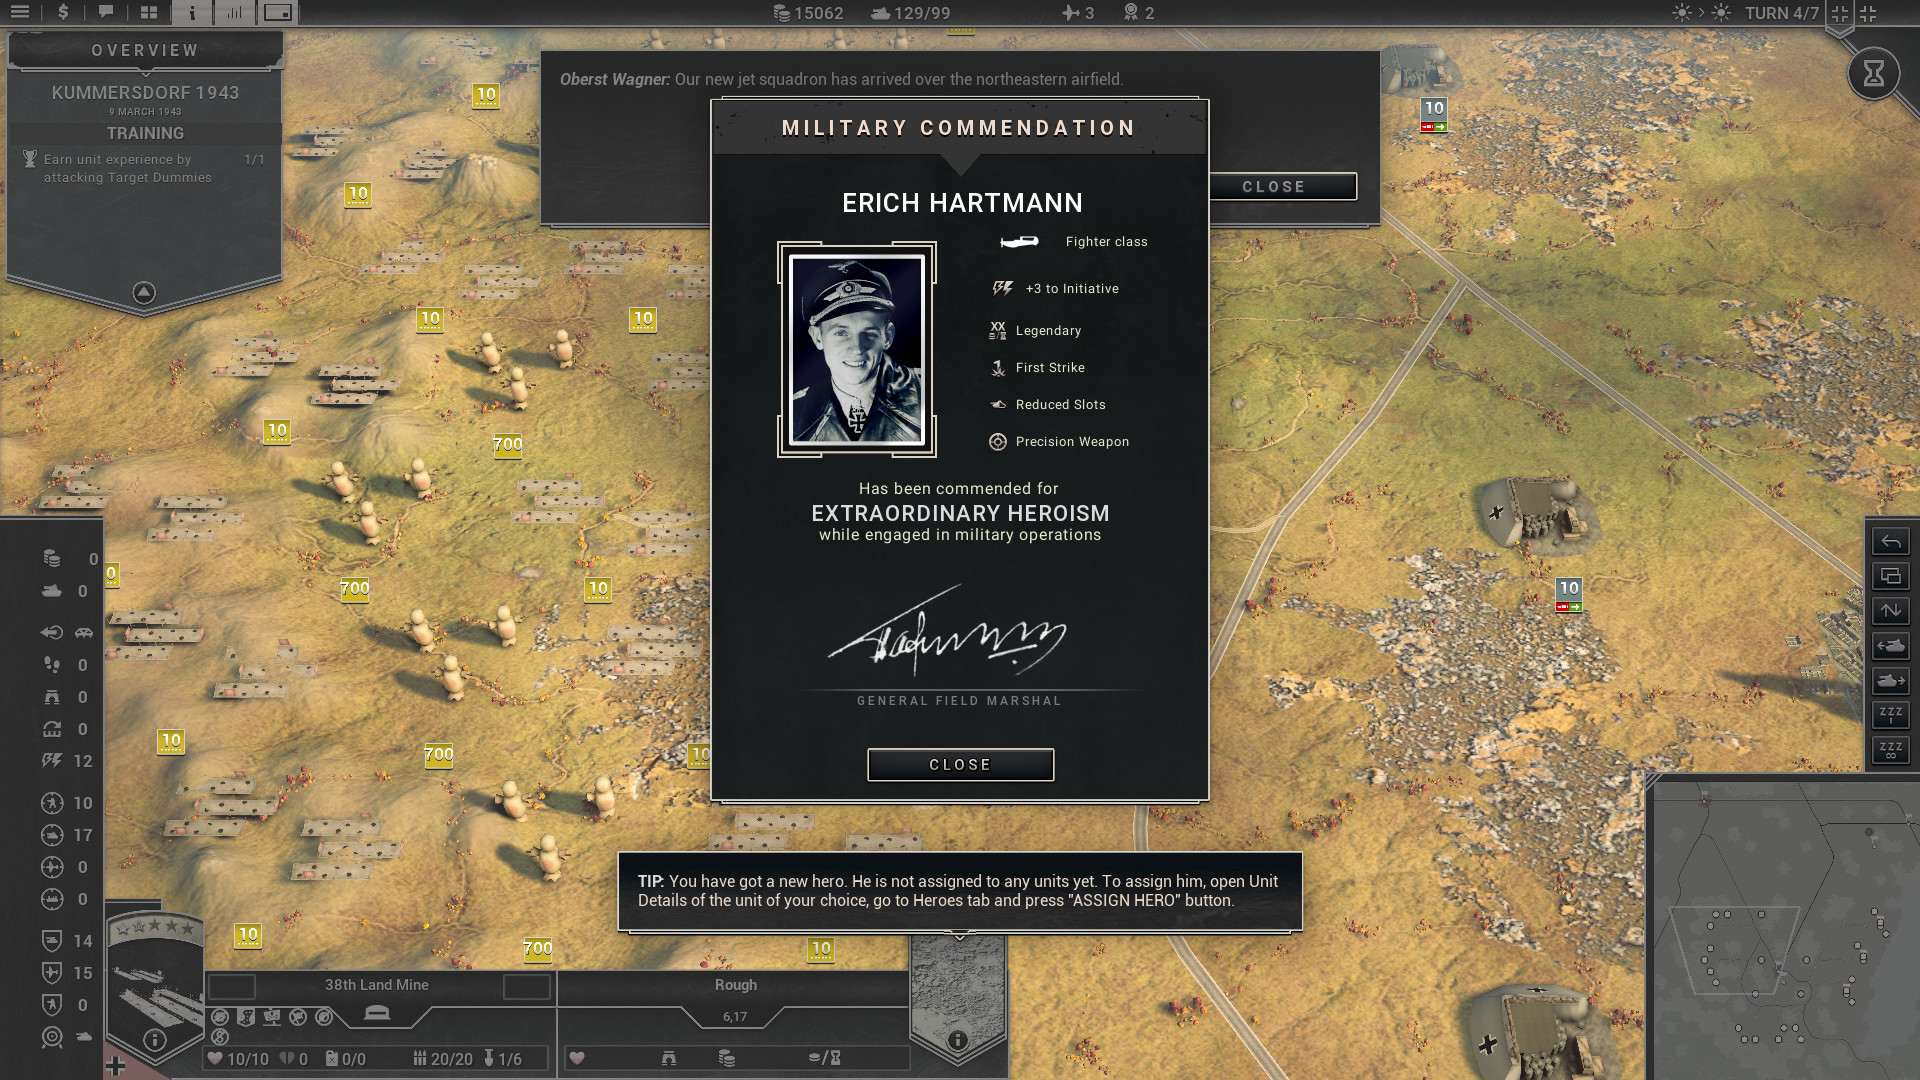 Panzer Corps 2: Axis Operations - 1943 Featured Screenshot #1